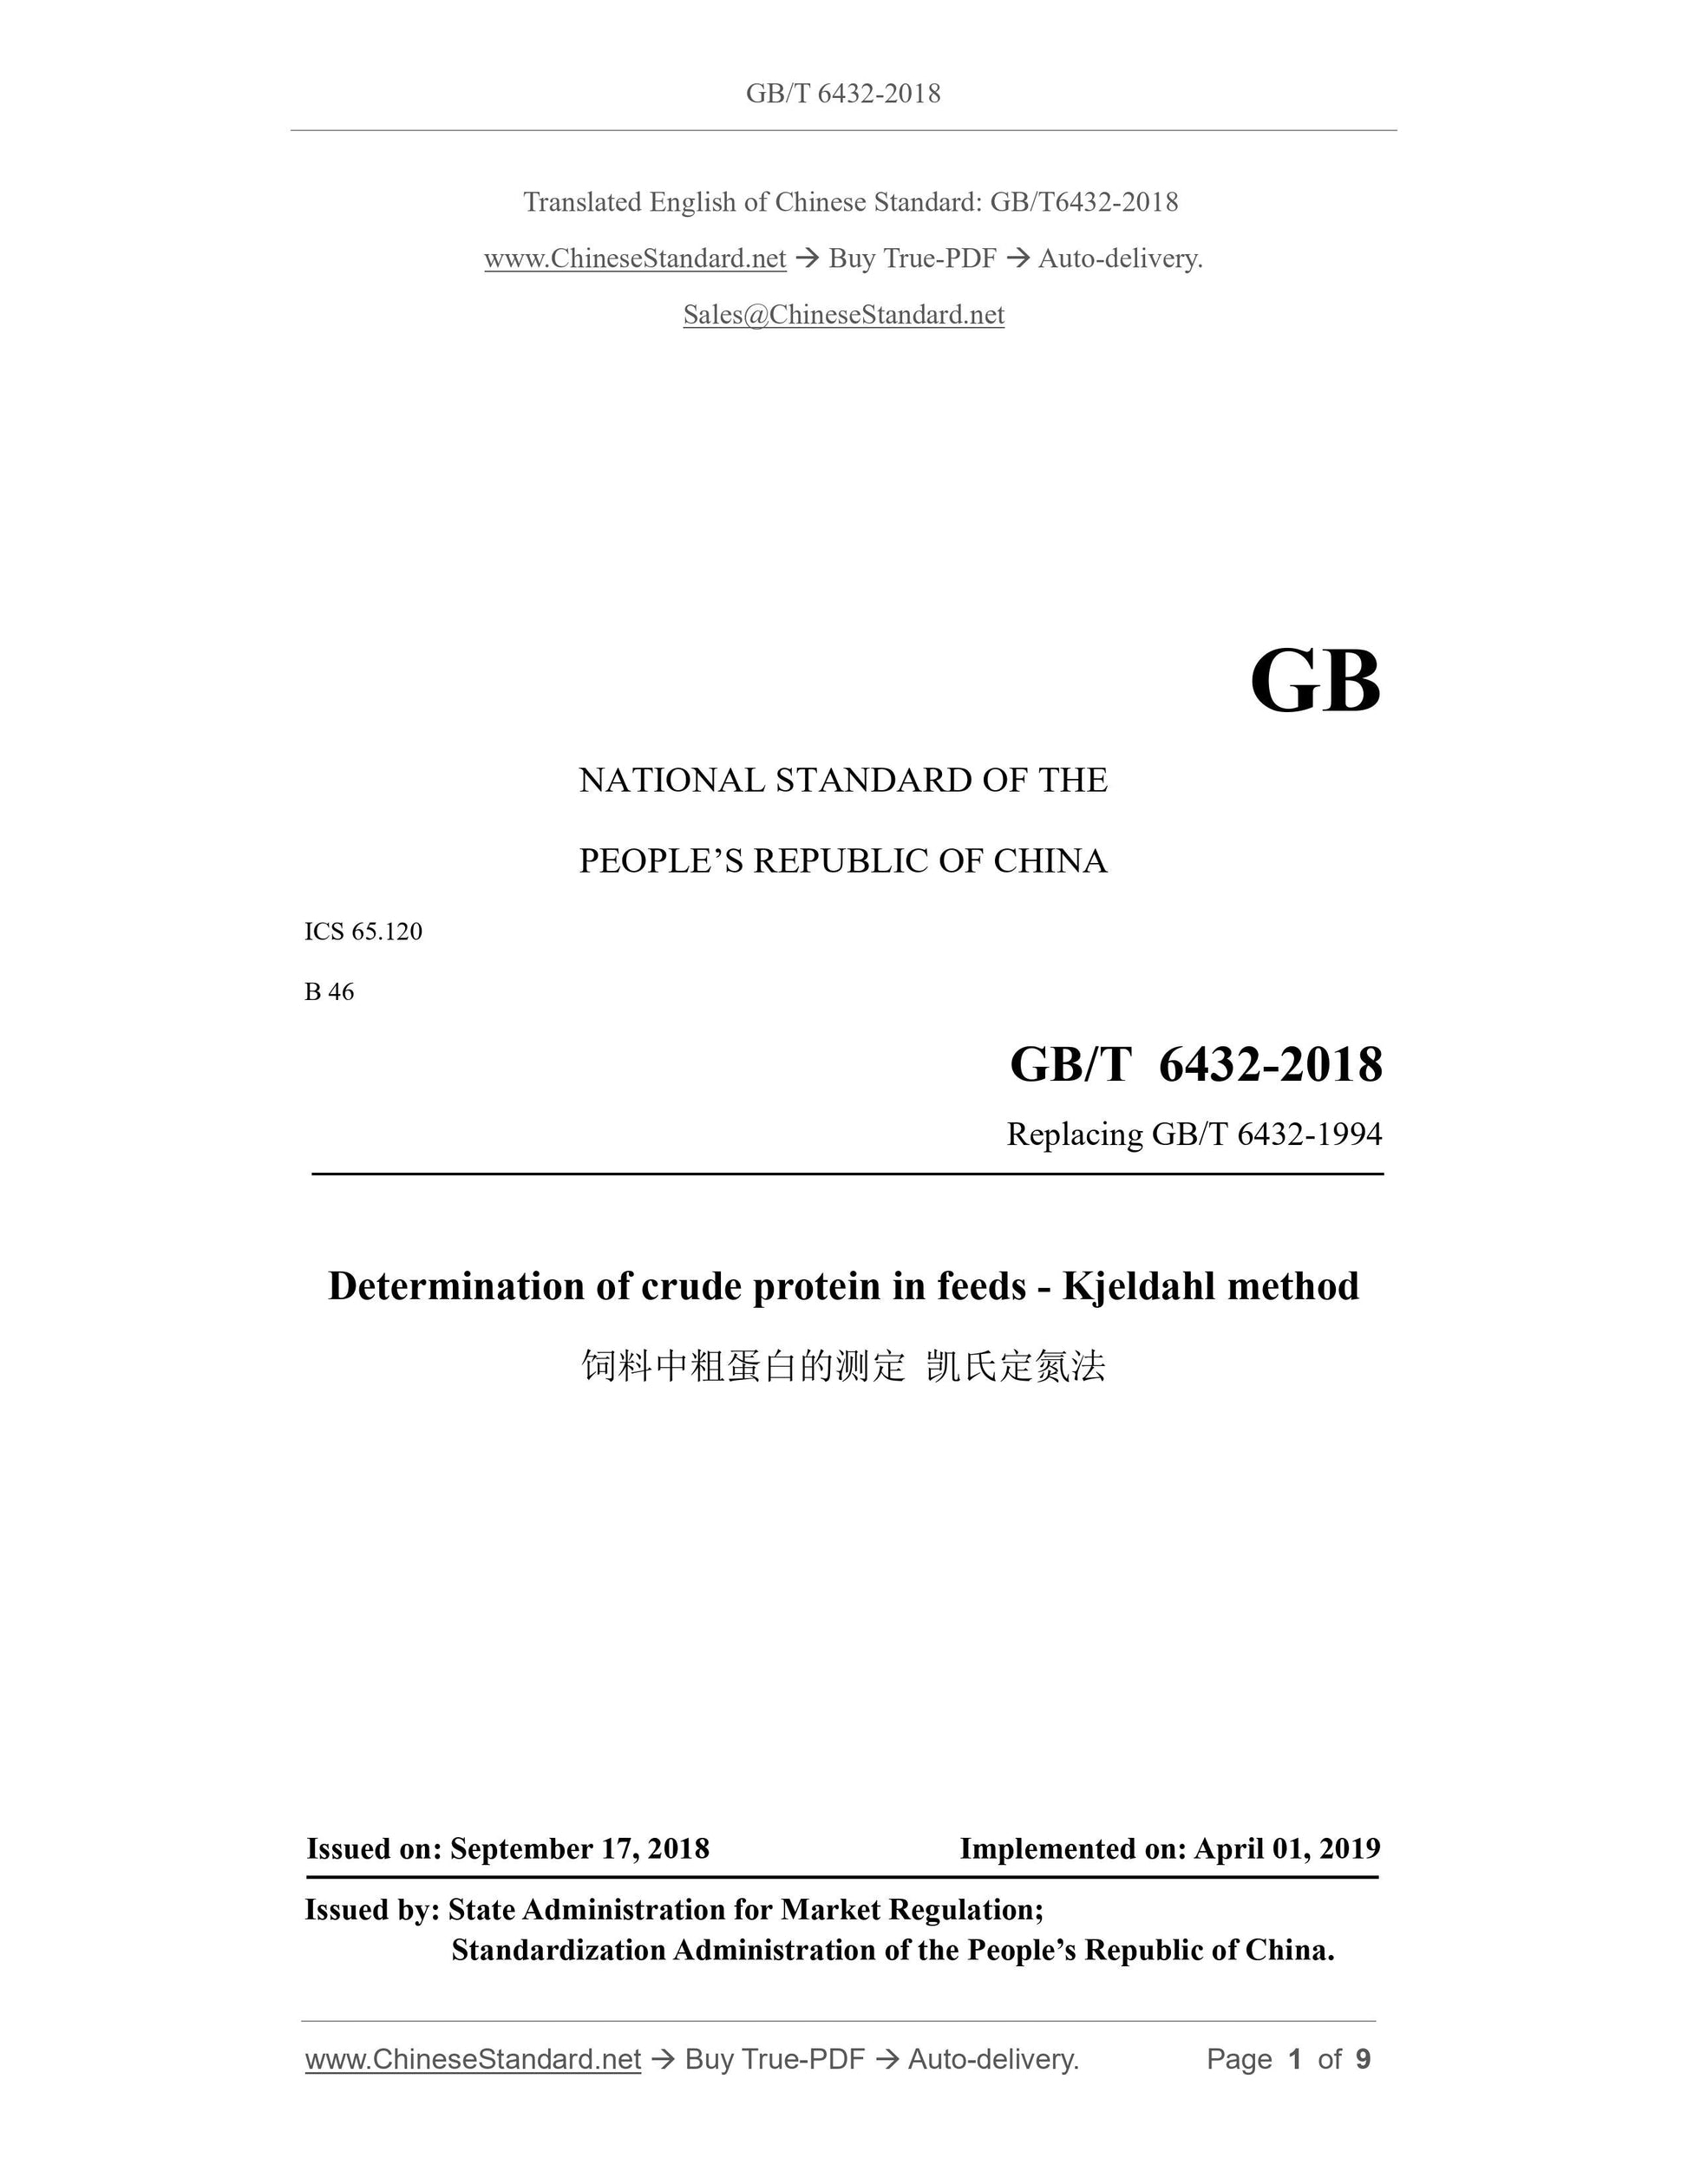 GB/T 6432-2018 Page 1